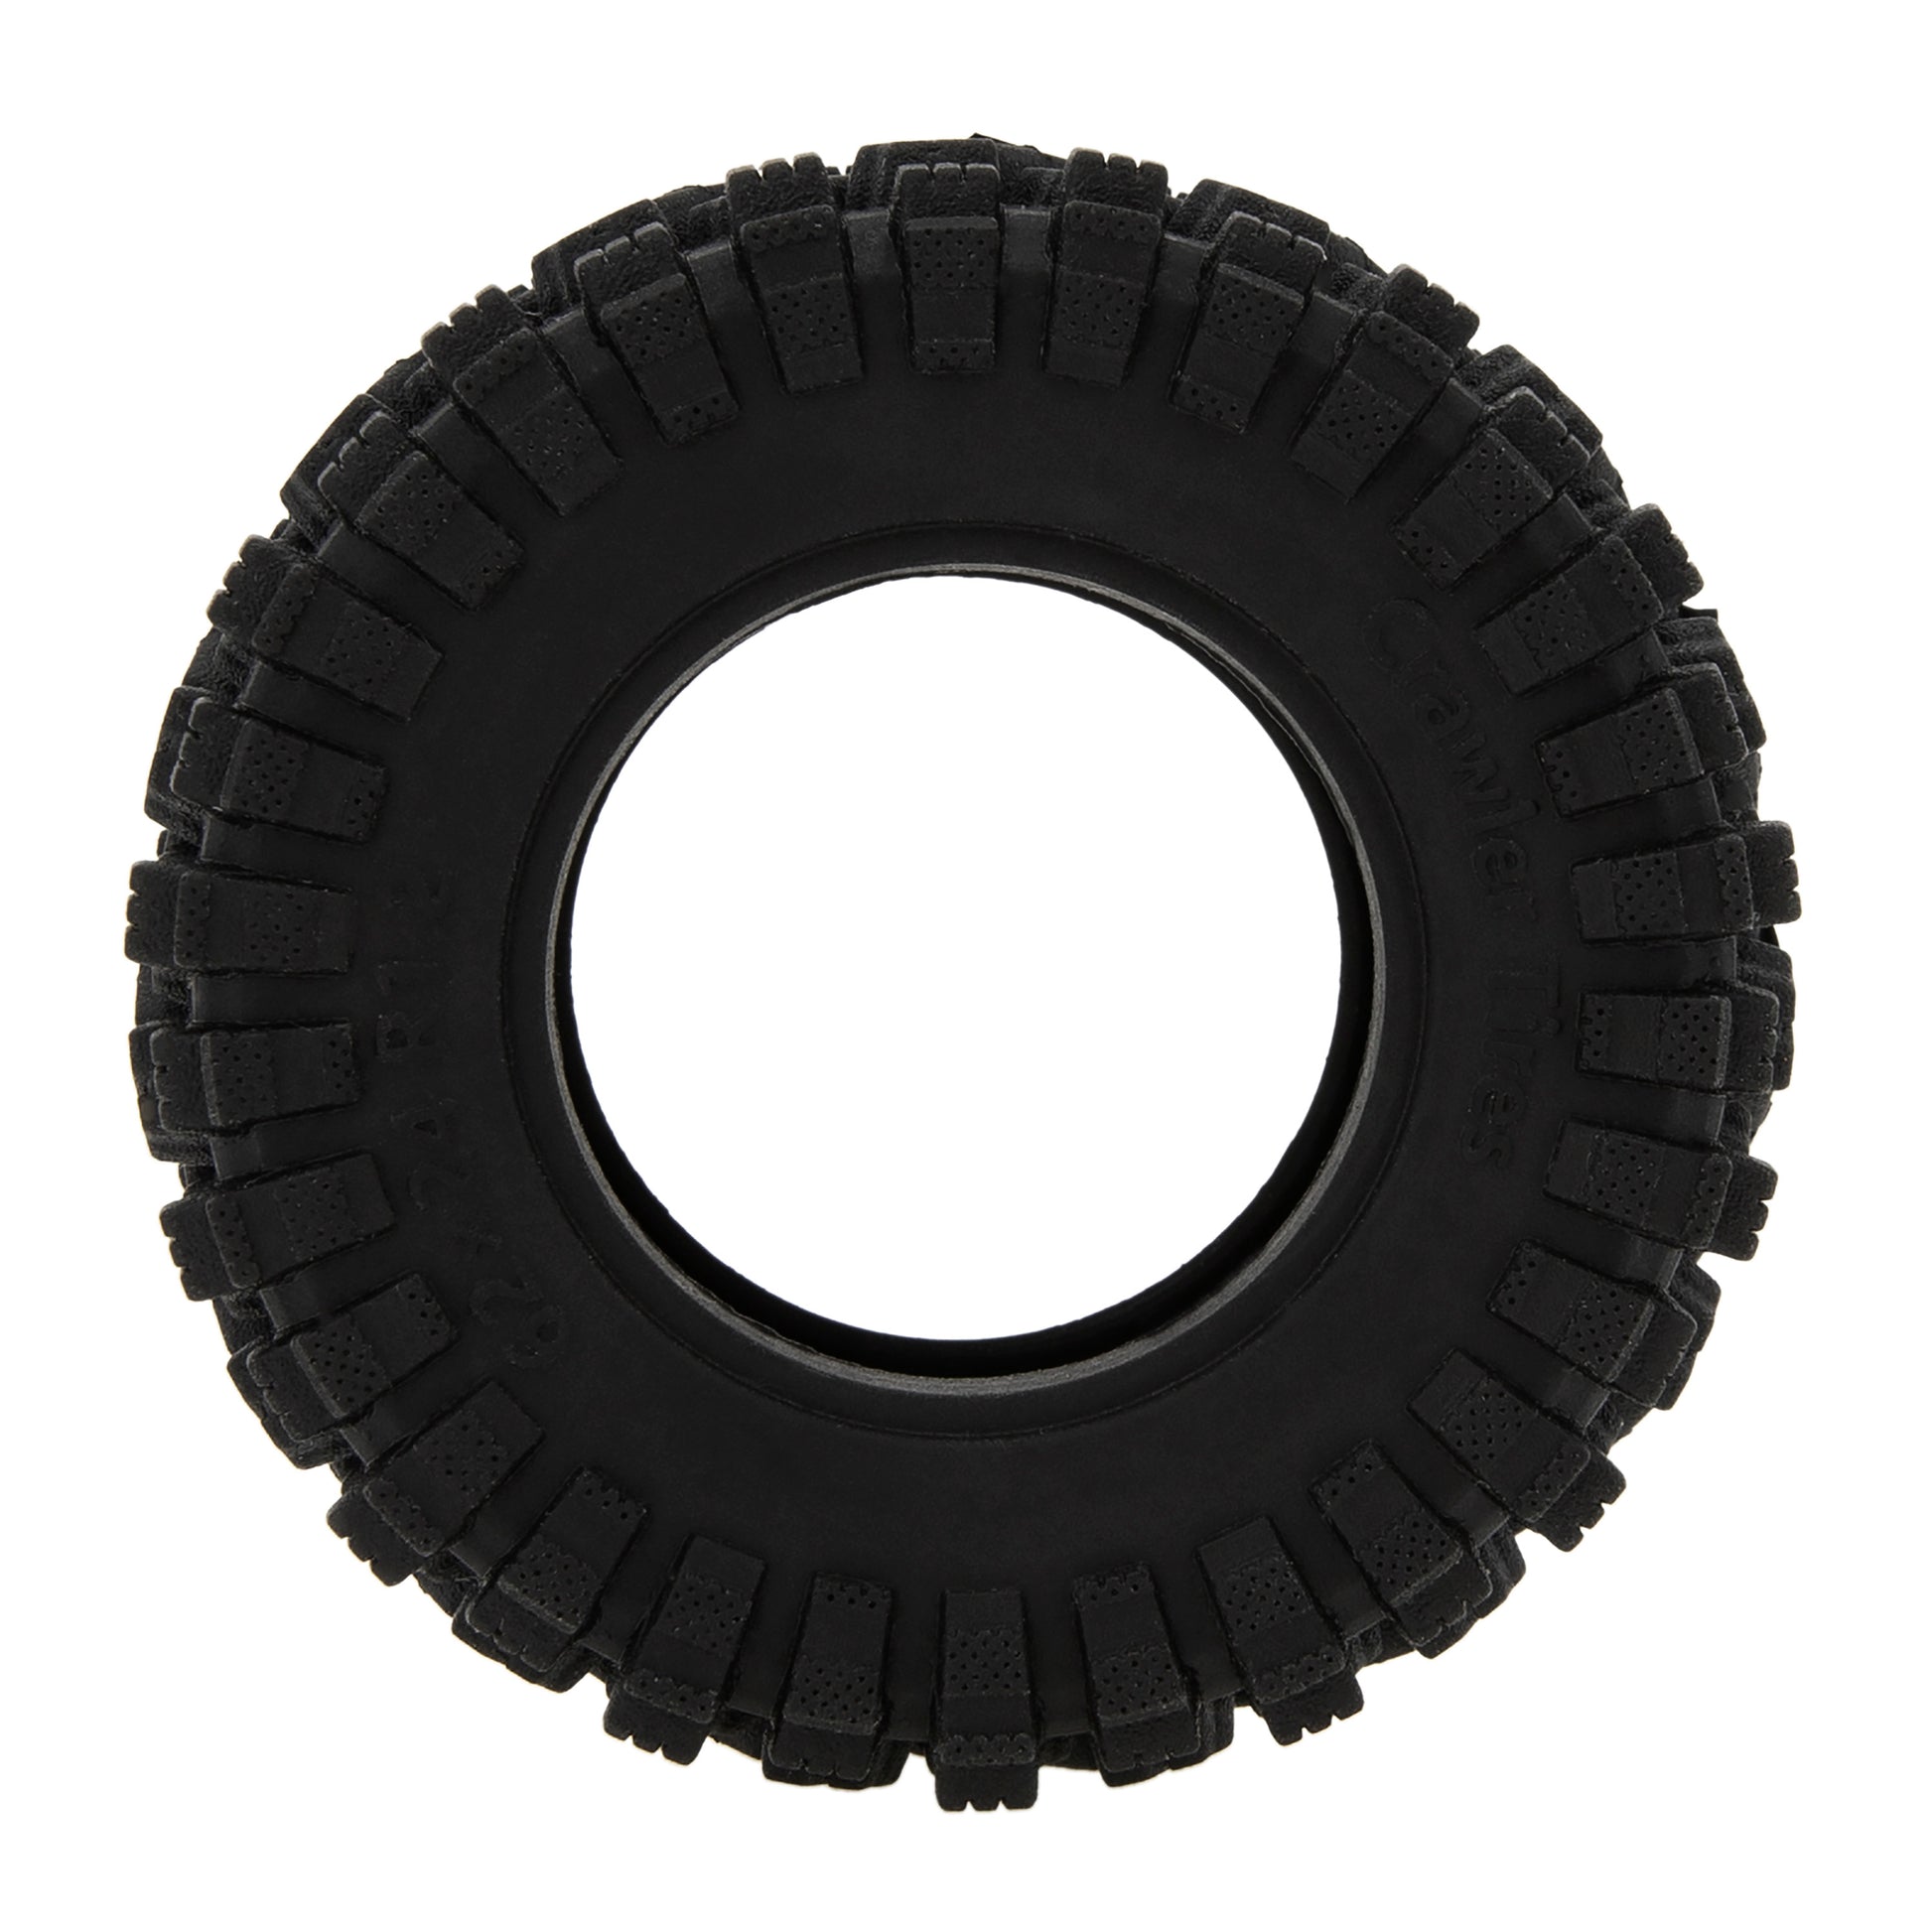 A type 1.2-inch Beadlock Tires for SCX24, TRX4M, FCX24